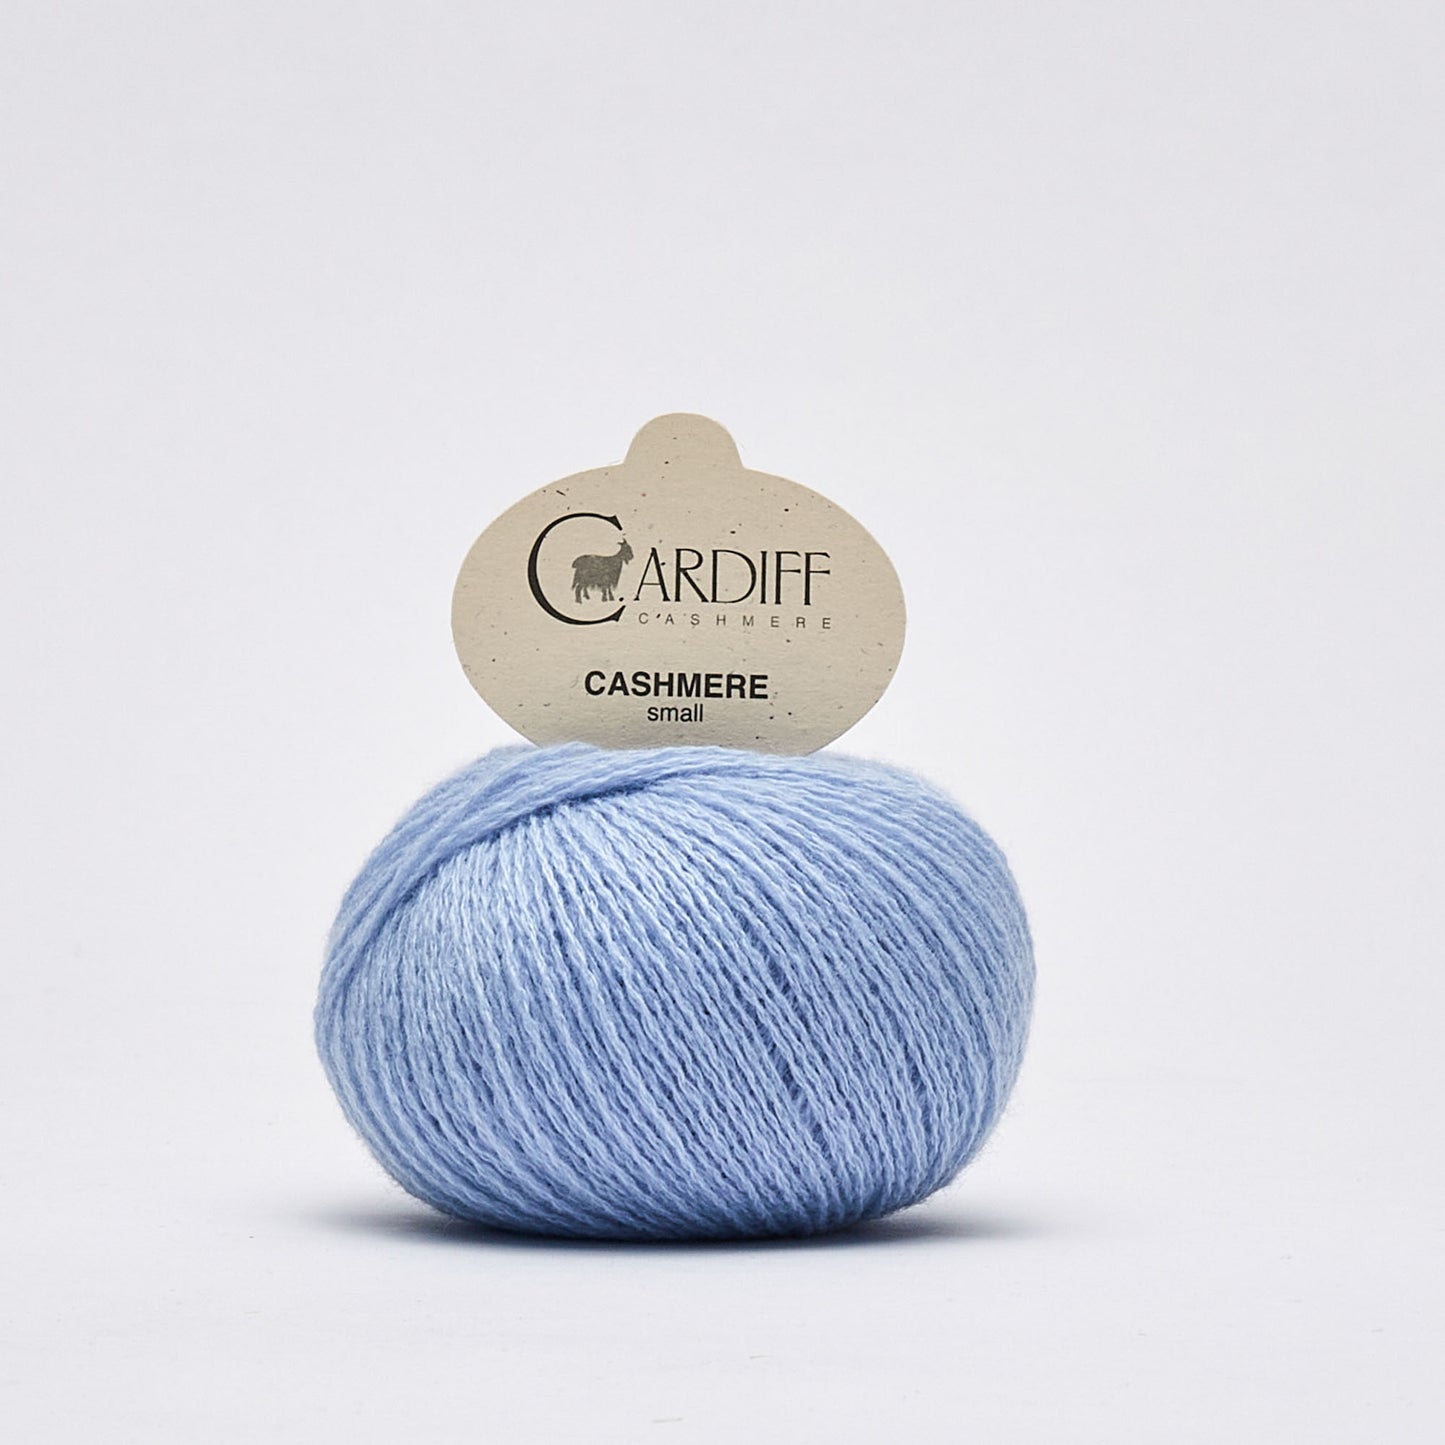 Kaschmirwolle - Cardiff Cashmere Small 4/28 - NS 2.5-3 mm